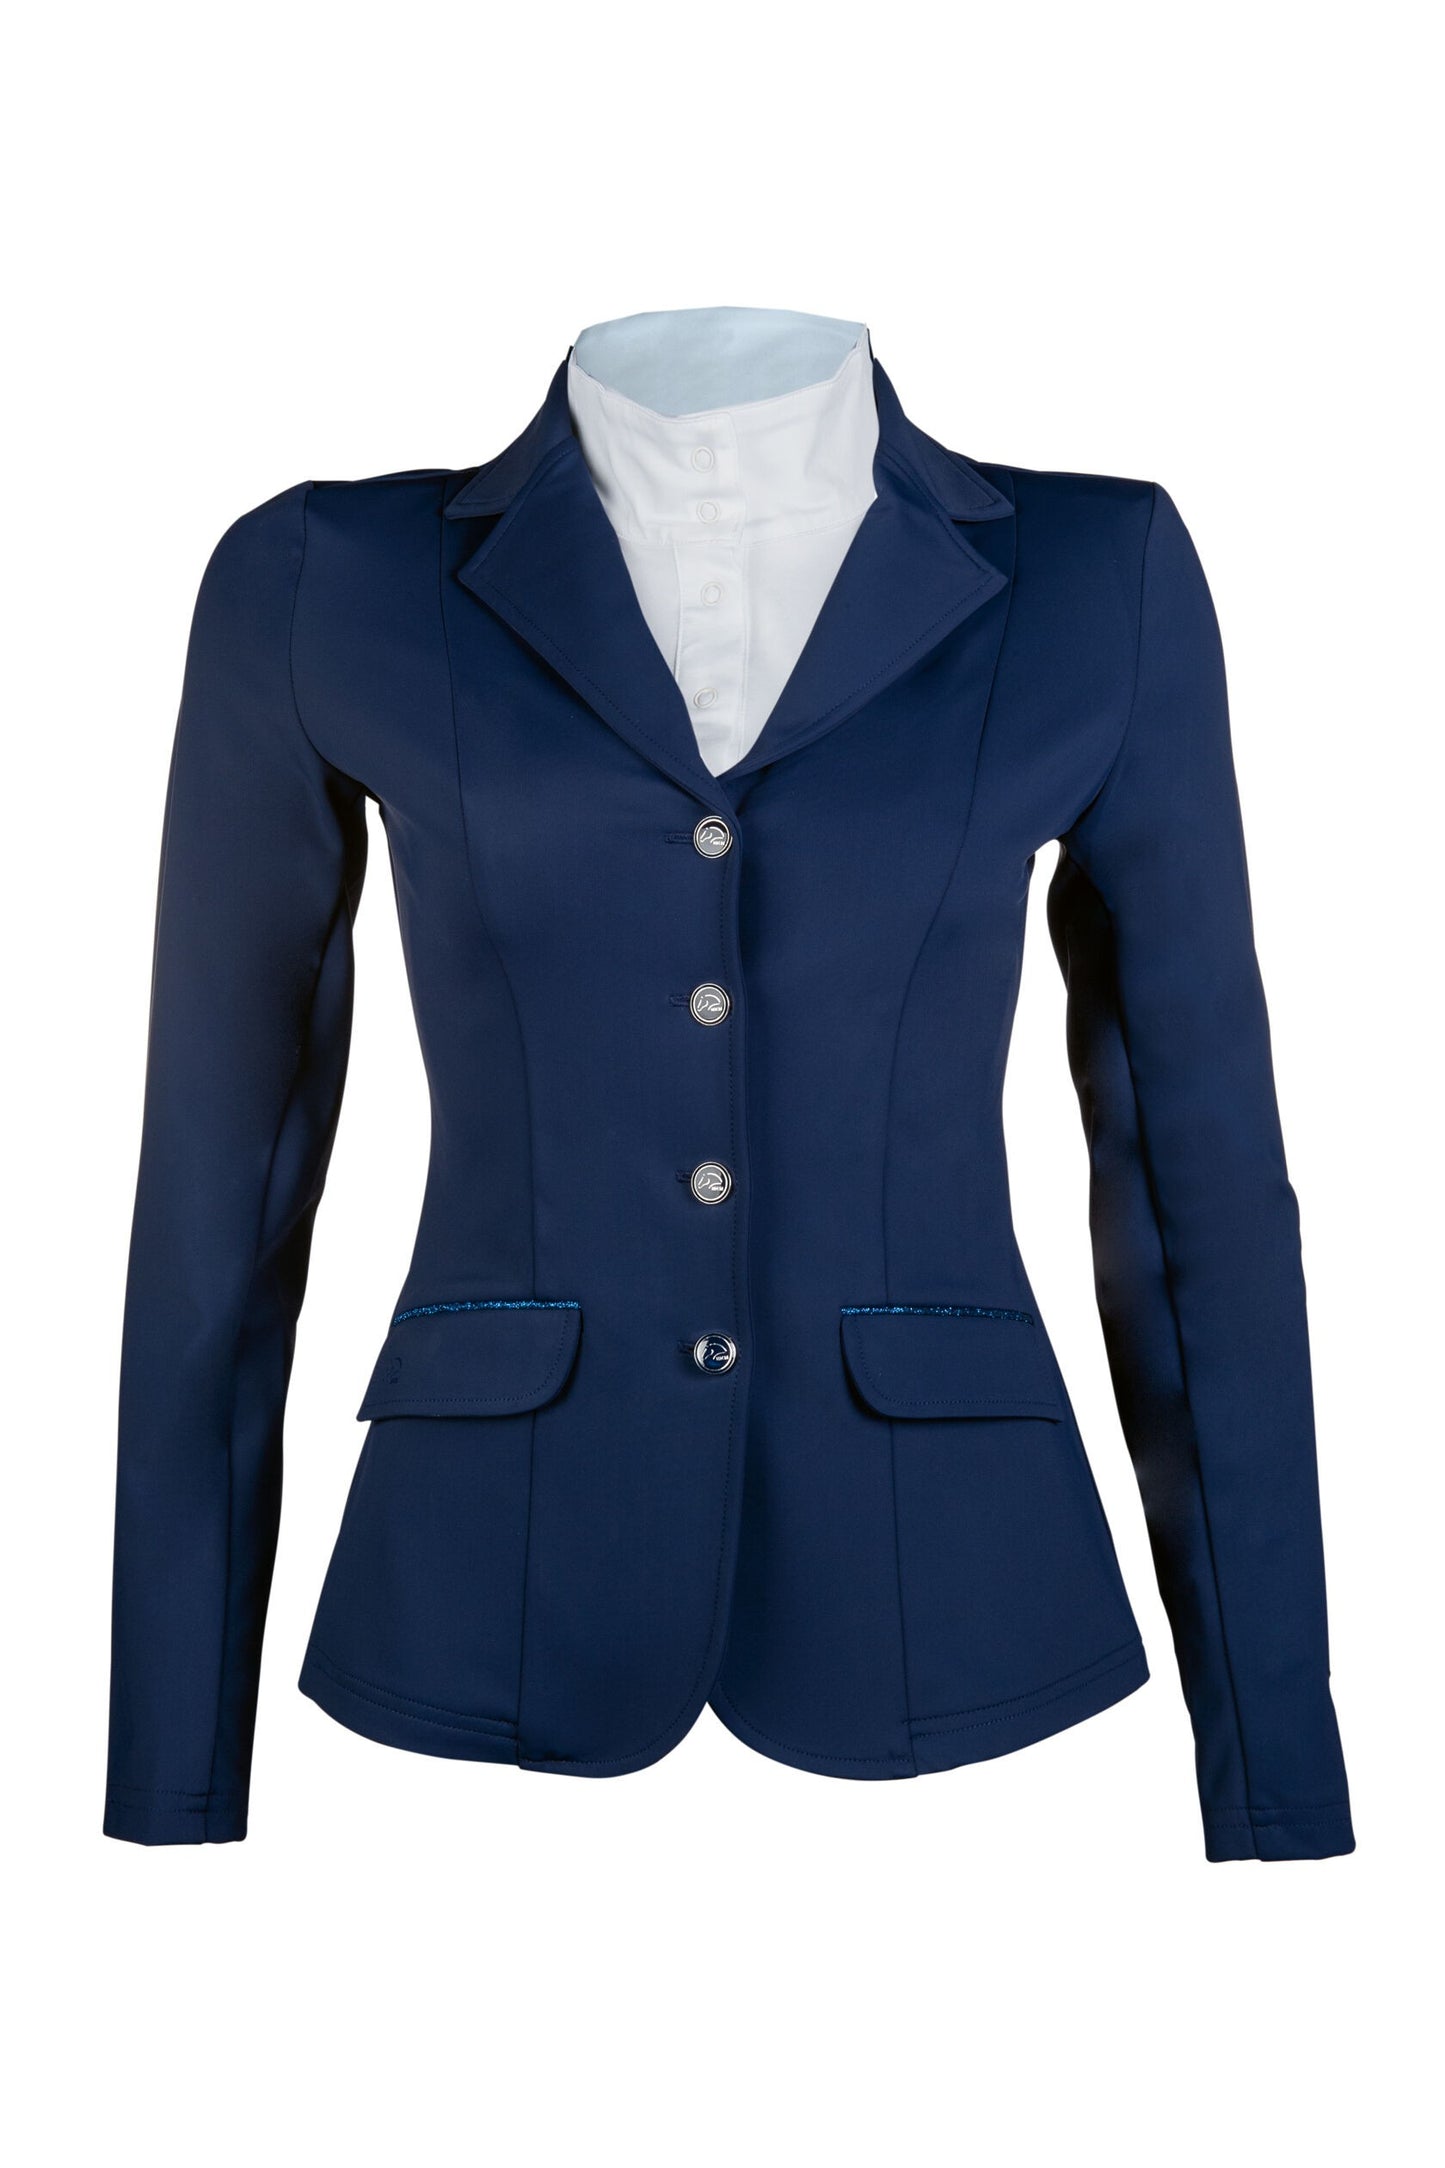 HKM Luisa Competition Jacket - Navy